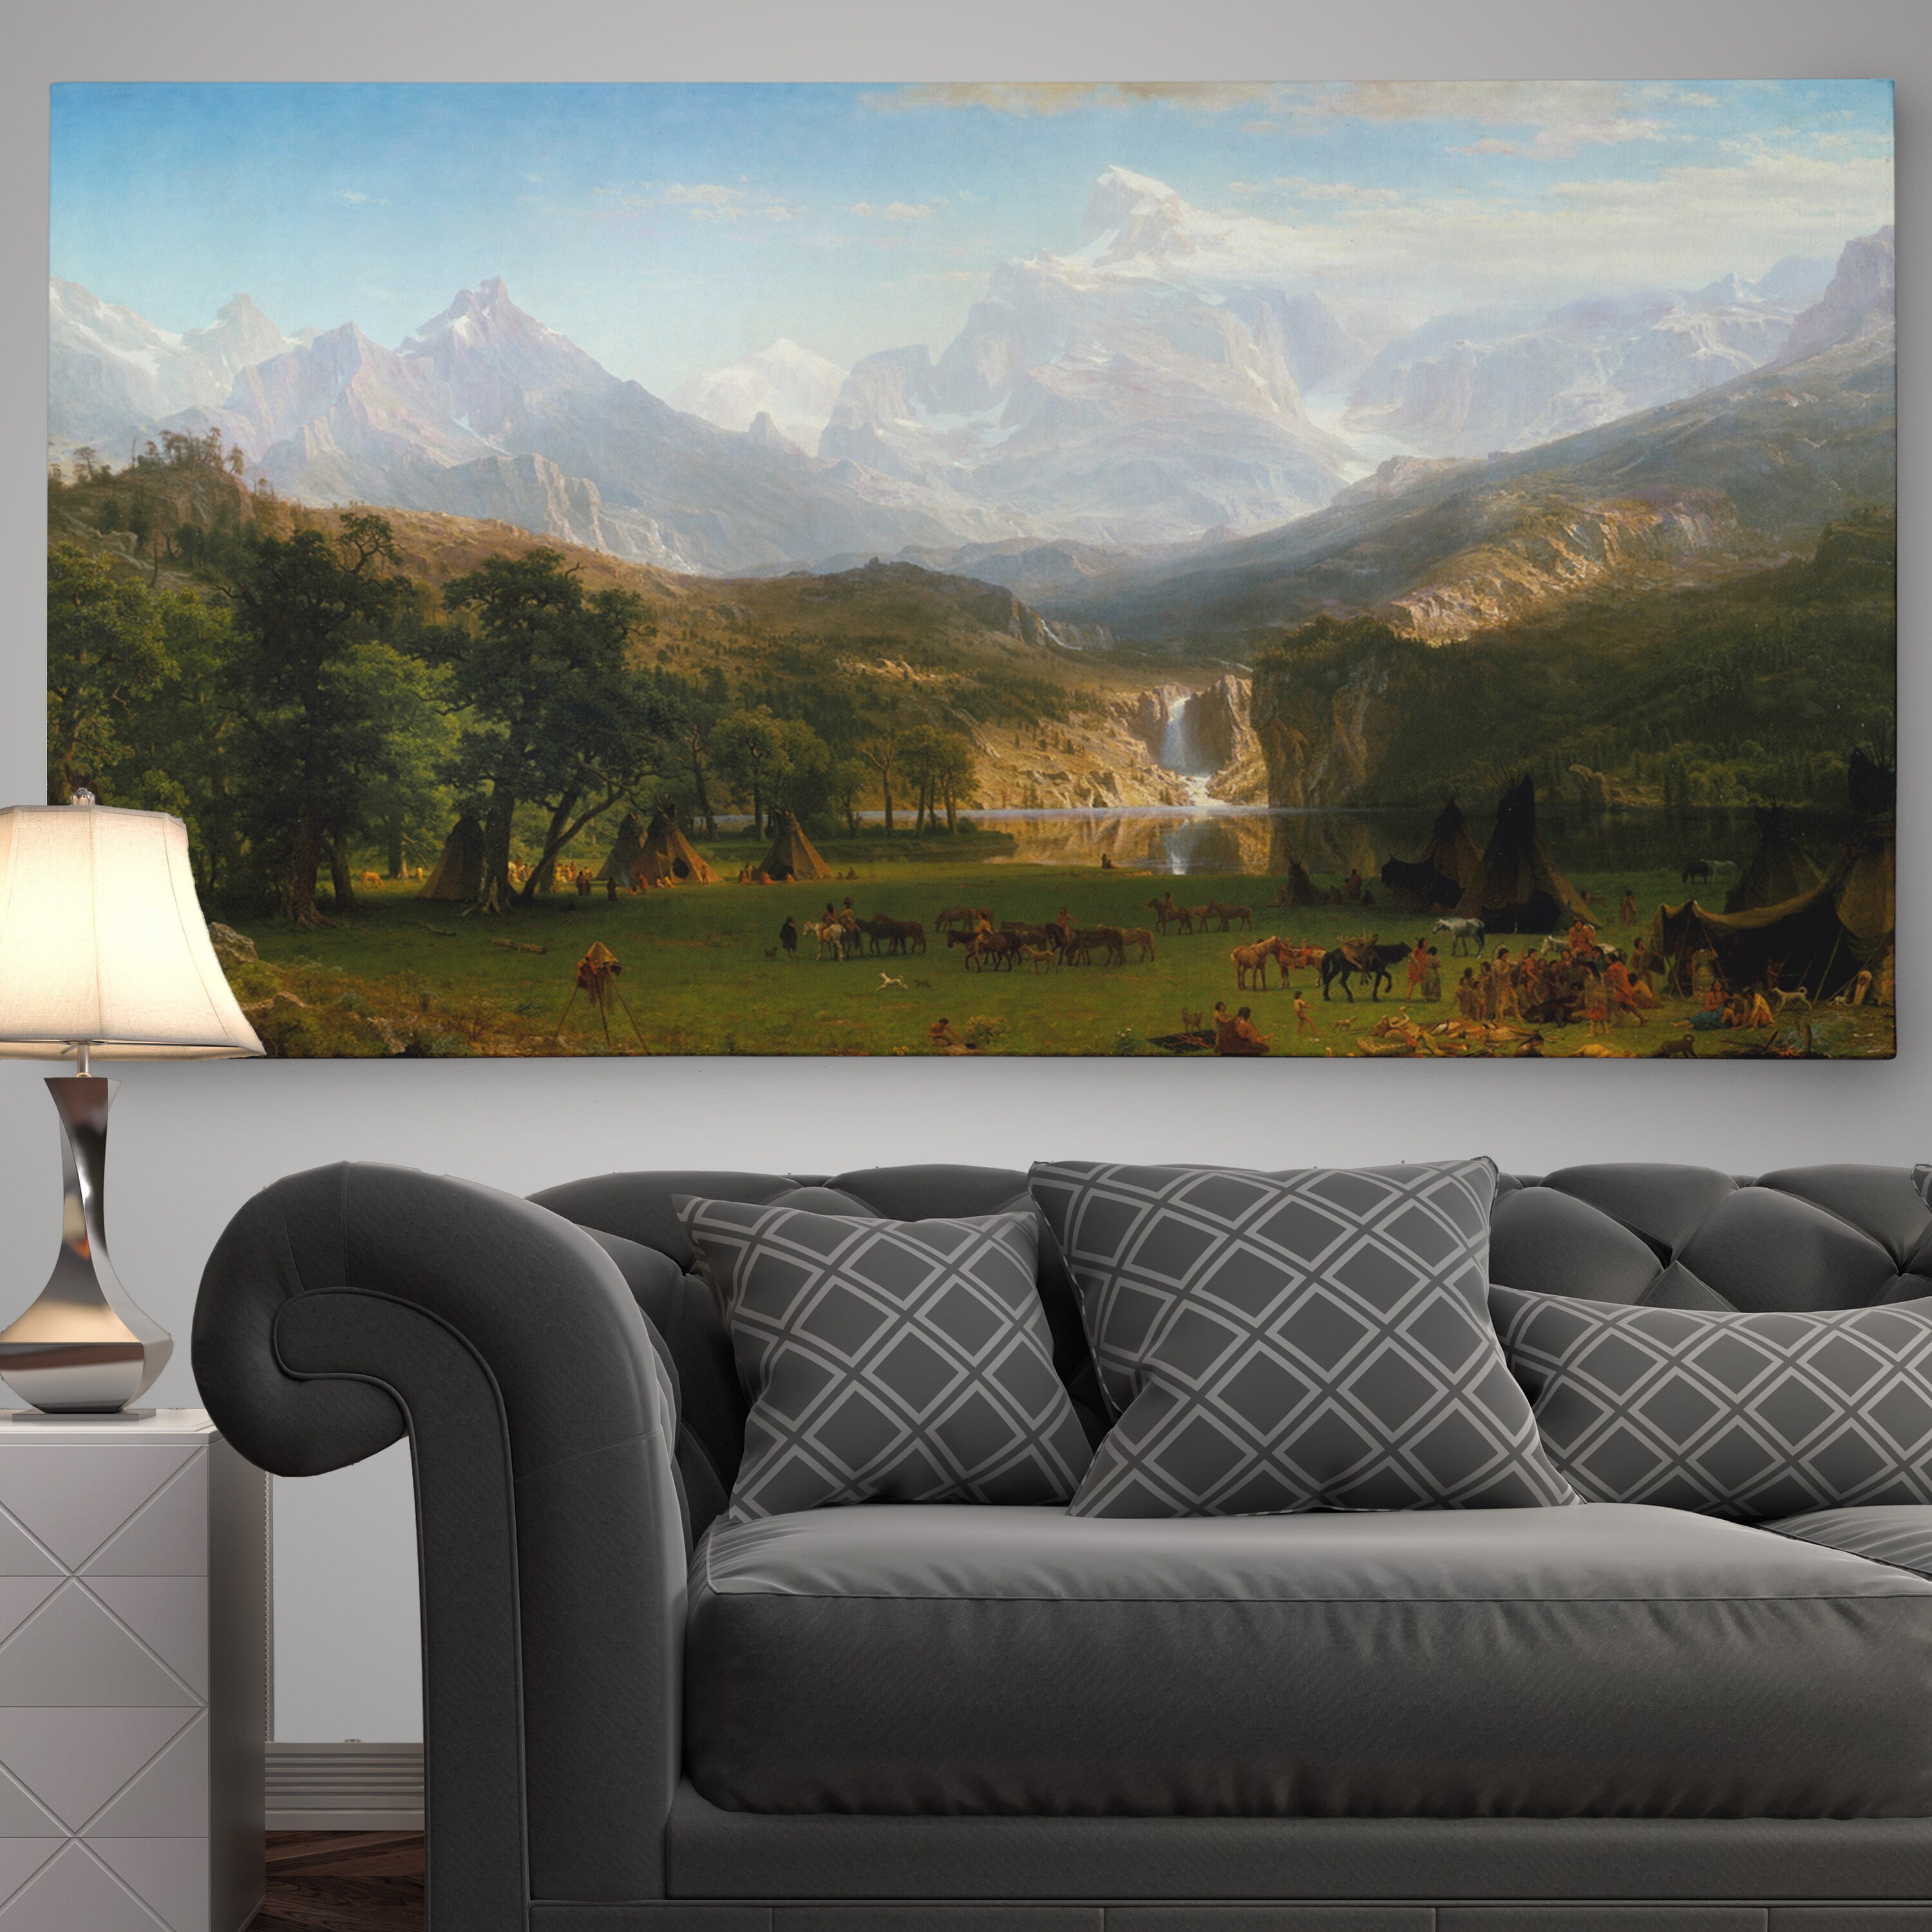 WEXFORD HOME The The Rocky Mountains Multicolor 12x20 Landers Peak Gallery Wrapped Canvas Wall Art 